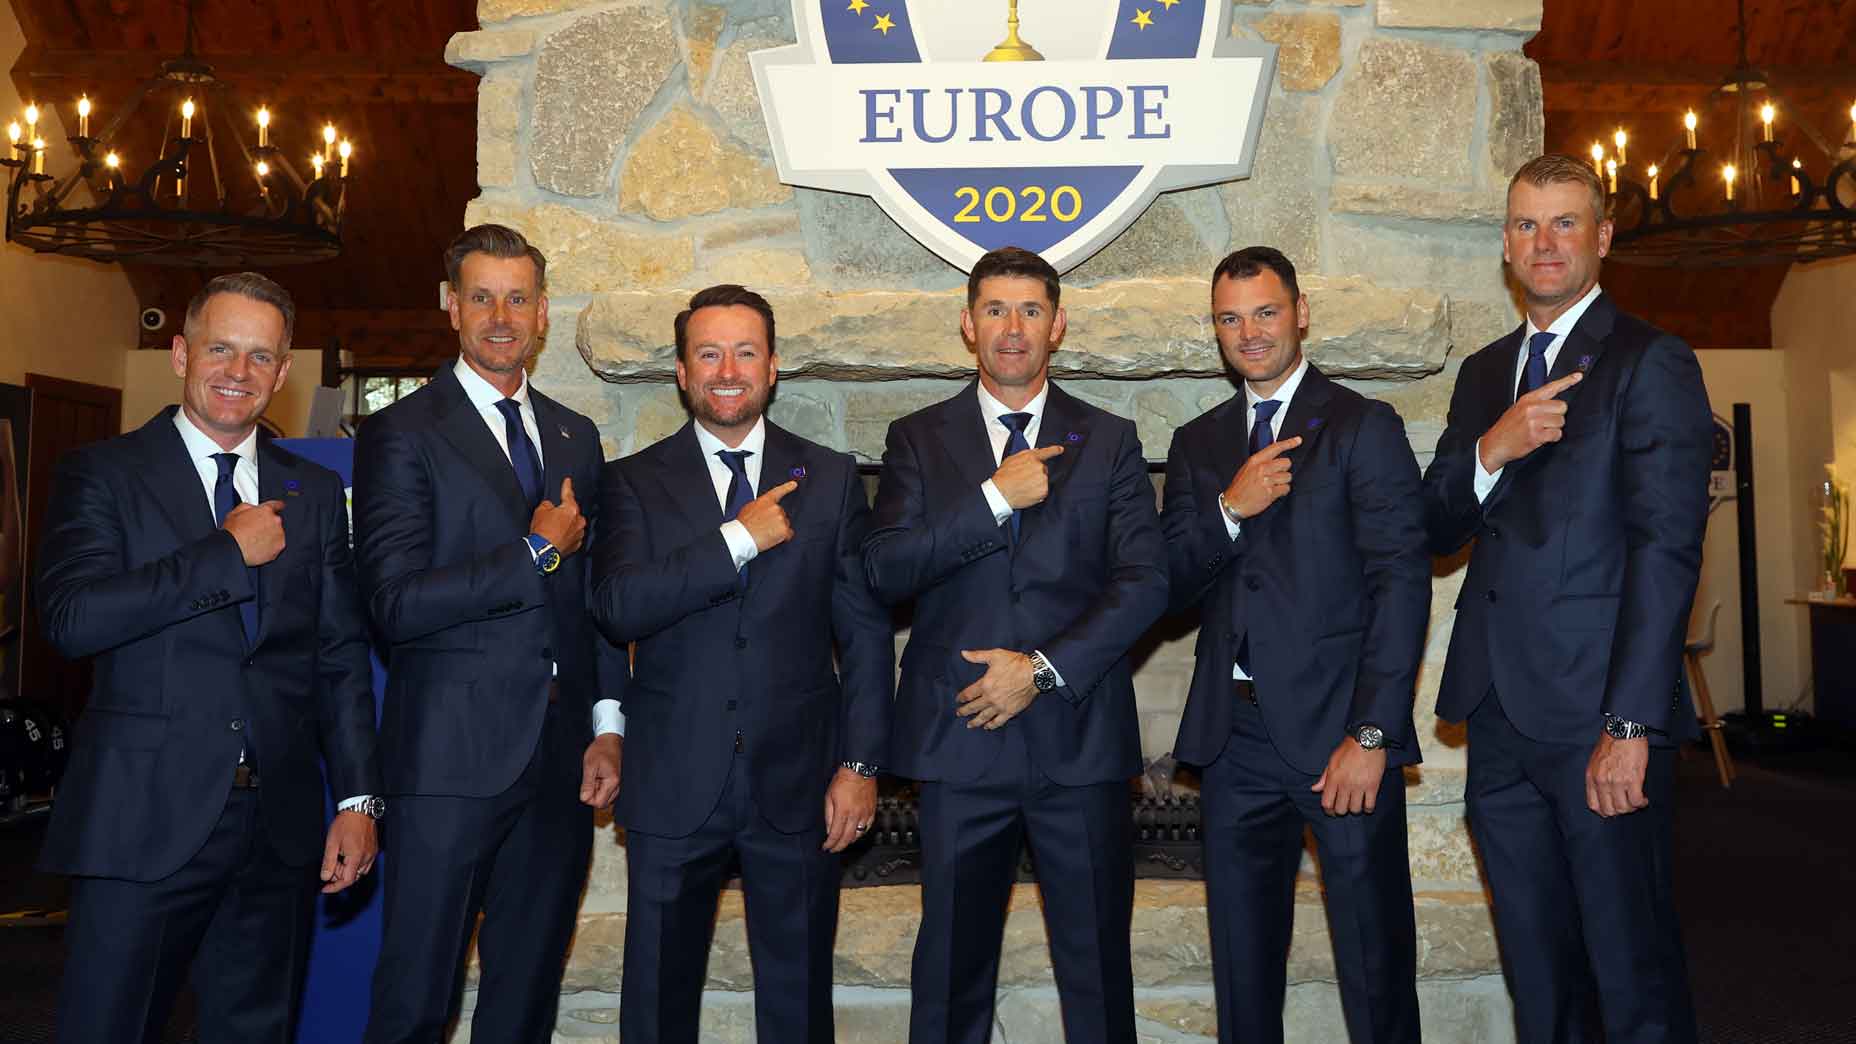 PHOTOS The best from the Ryder Cup Opening Ceremony